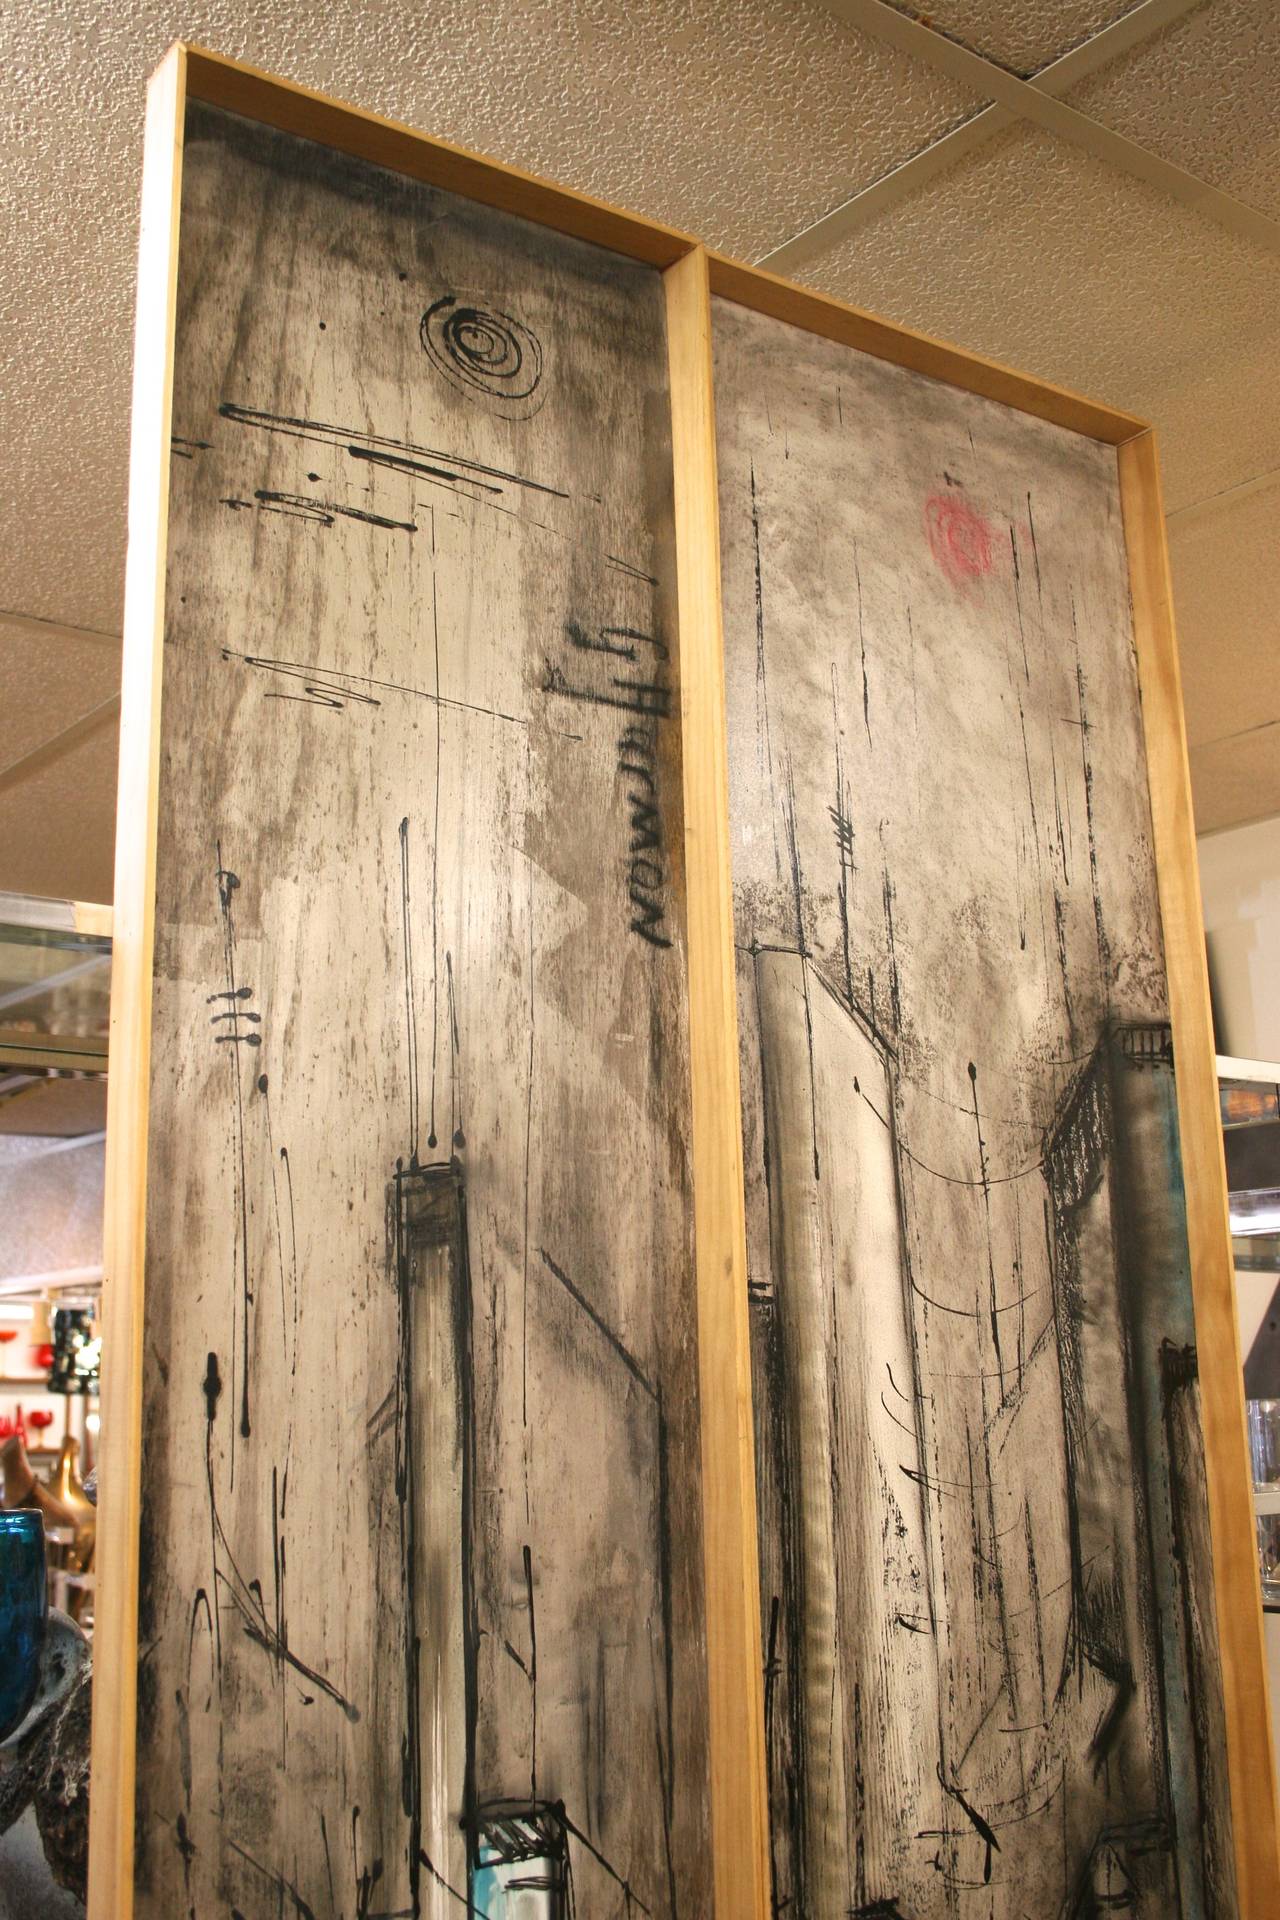 Tall, vertical abstract cityscapes painted on paper and attached to wood panels, framed with thin unfinished wood. These two versatile paintings may be displayed together or separately. The subdued gray, steel blue and cream color palette contrasts